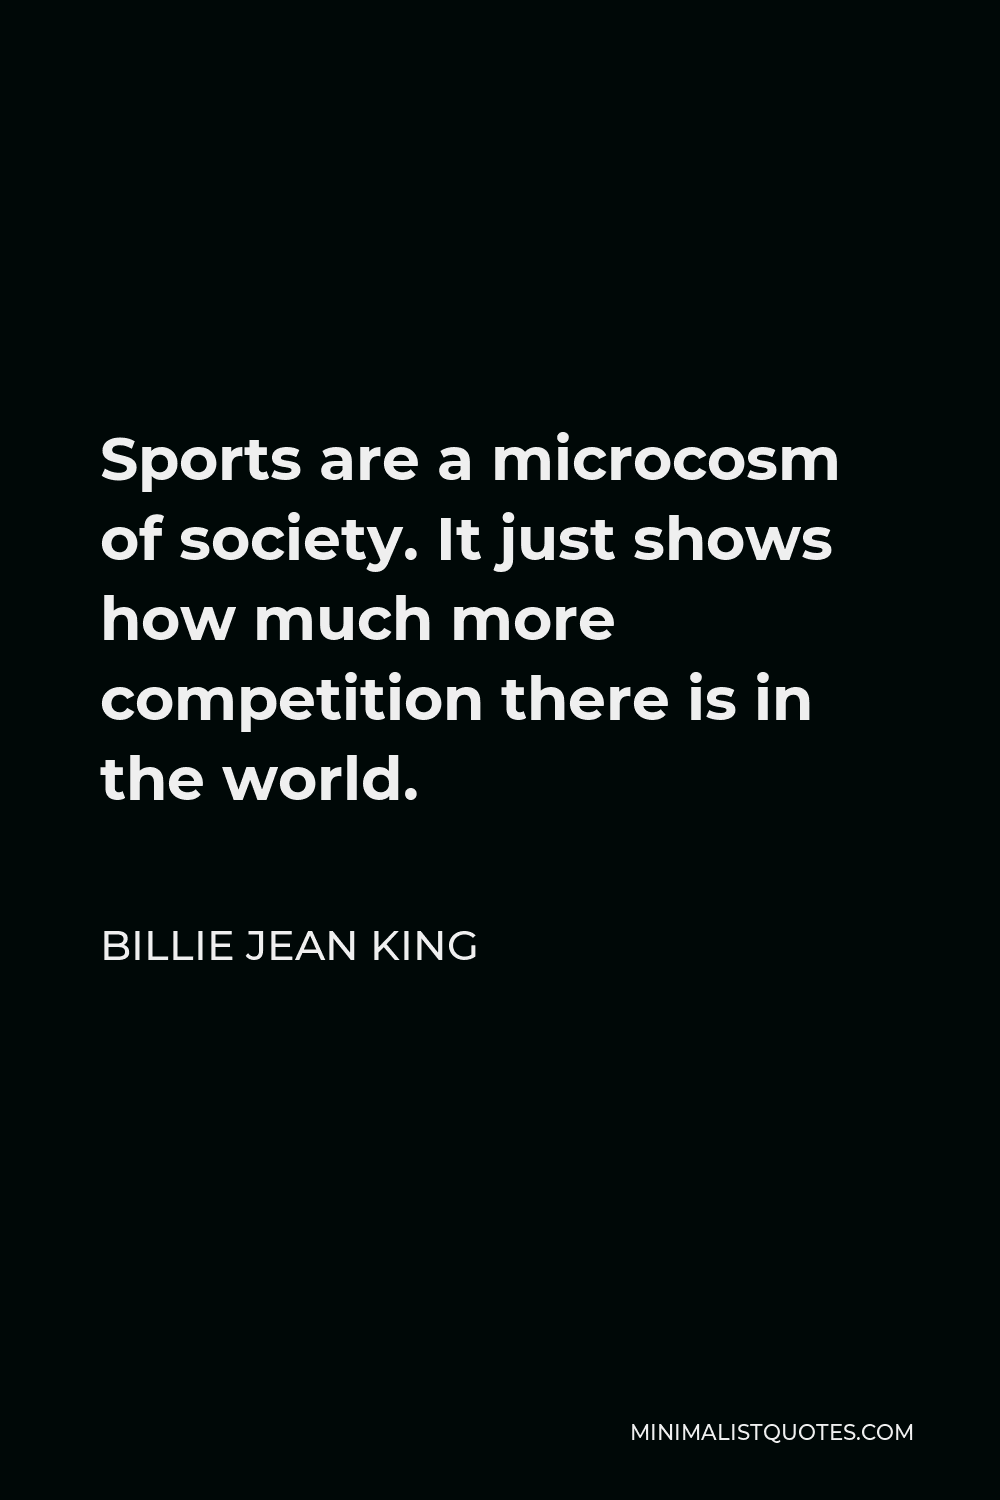 Billie Jean King Quote - Sports are a microcosm of society. It just shows how much more competition there is in the world.